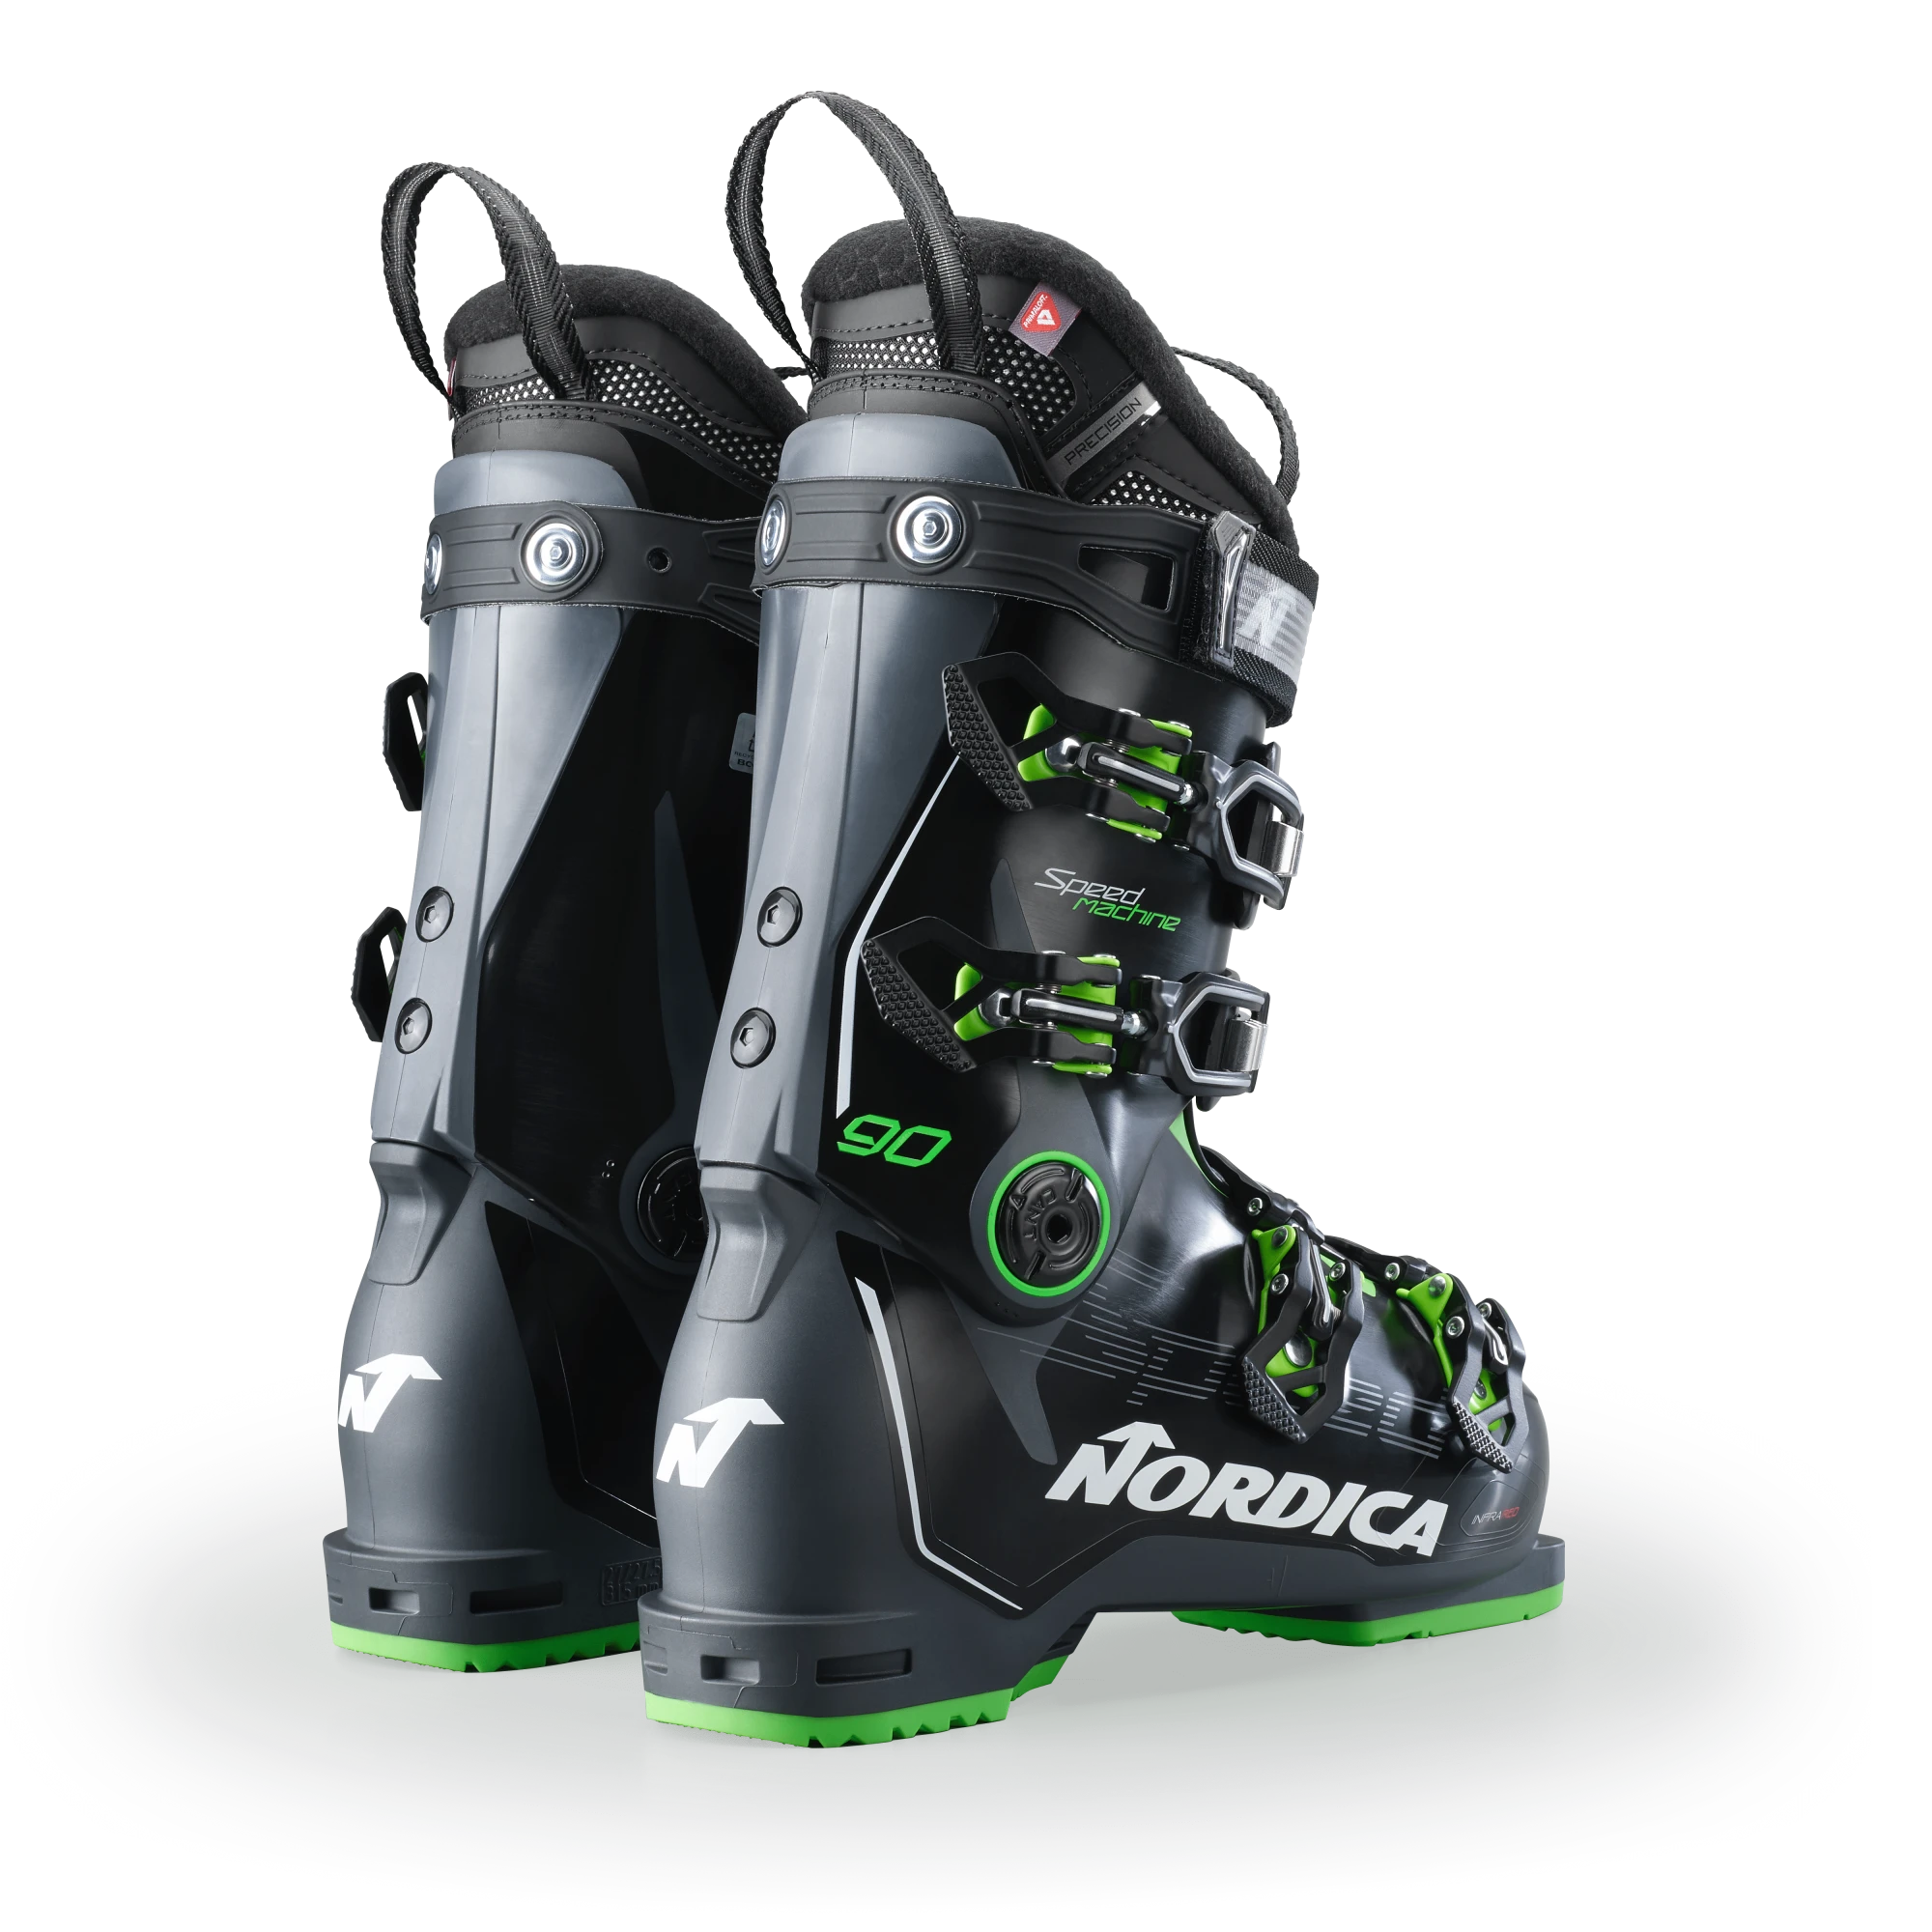 SPEEDMACHINE 90 Nordica - Skis and Boots – Official website